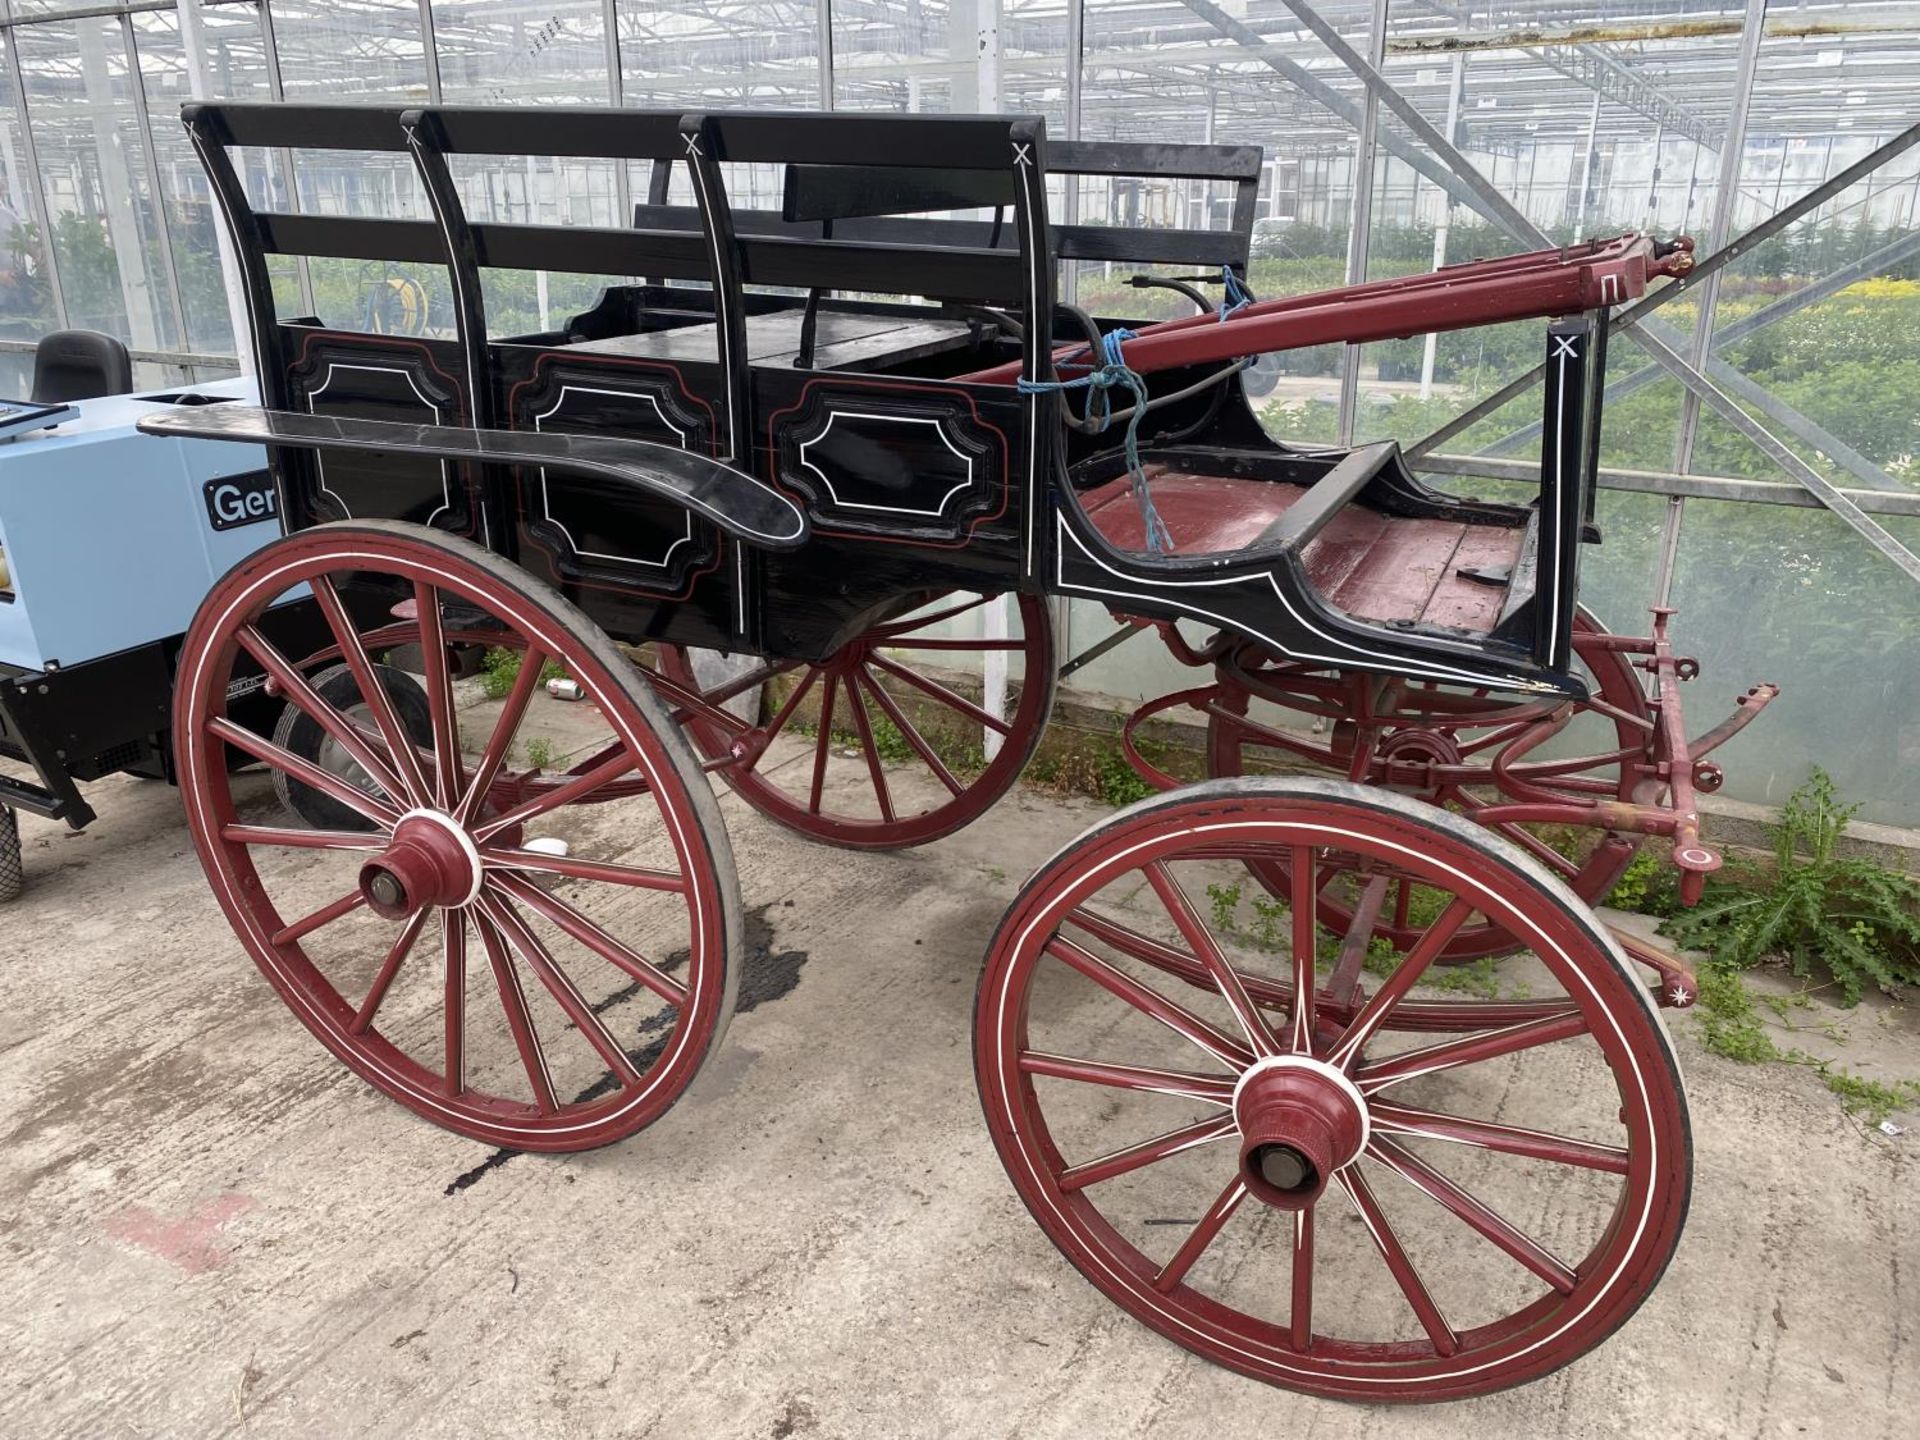 A FOUR WHEELED HORSE DRAWN KENT CARRIAGE IN EXCELLENT CONDITION - BODY 4'9" WIDE 6'8" LONG, SHAFTS